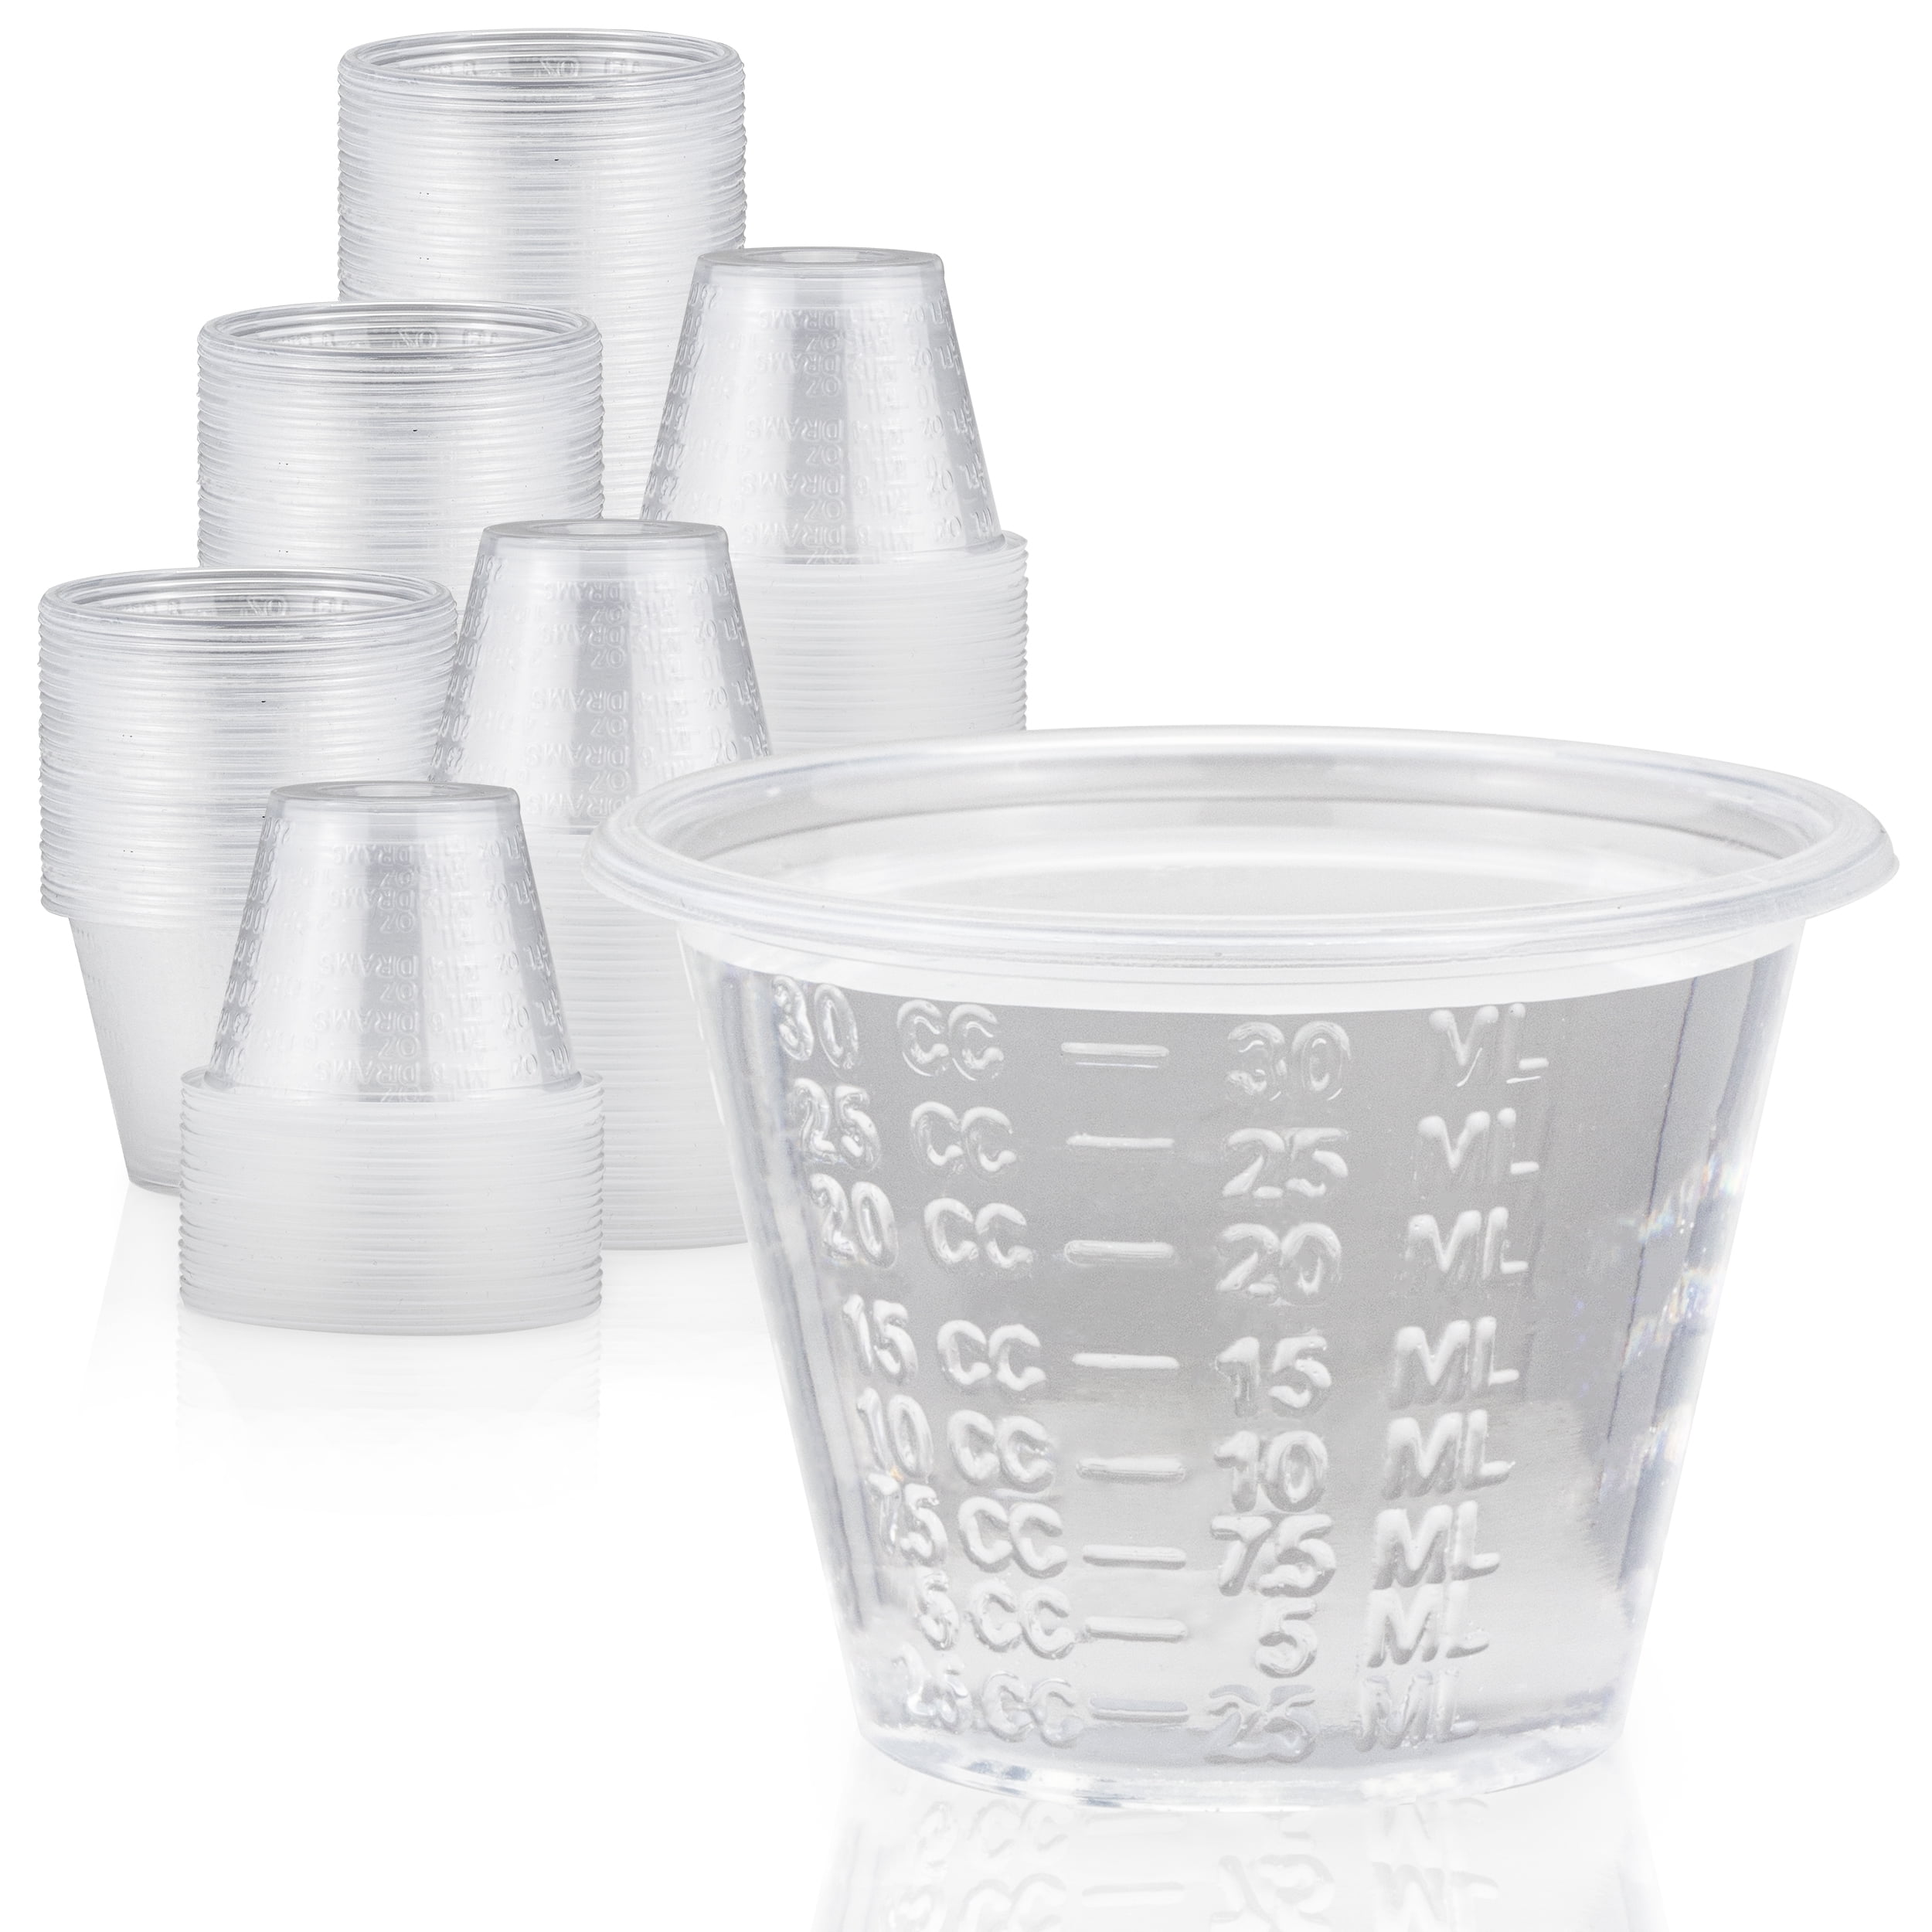 10 Small Measuring Cups 10 pcs Perfume Supplies - MeFragrance